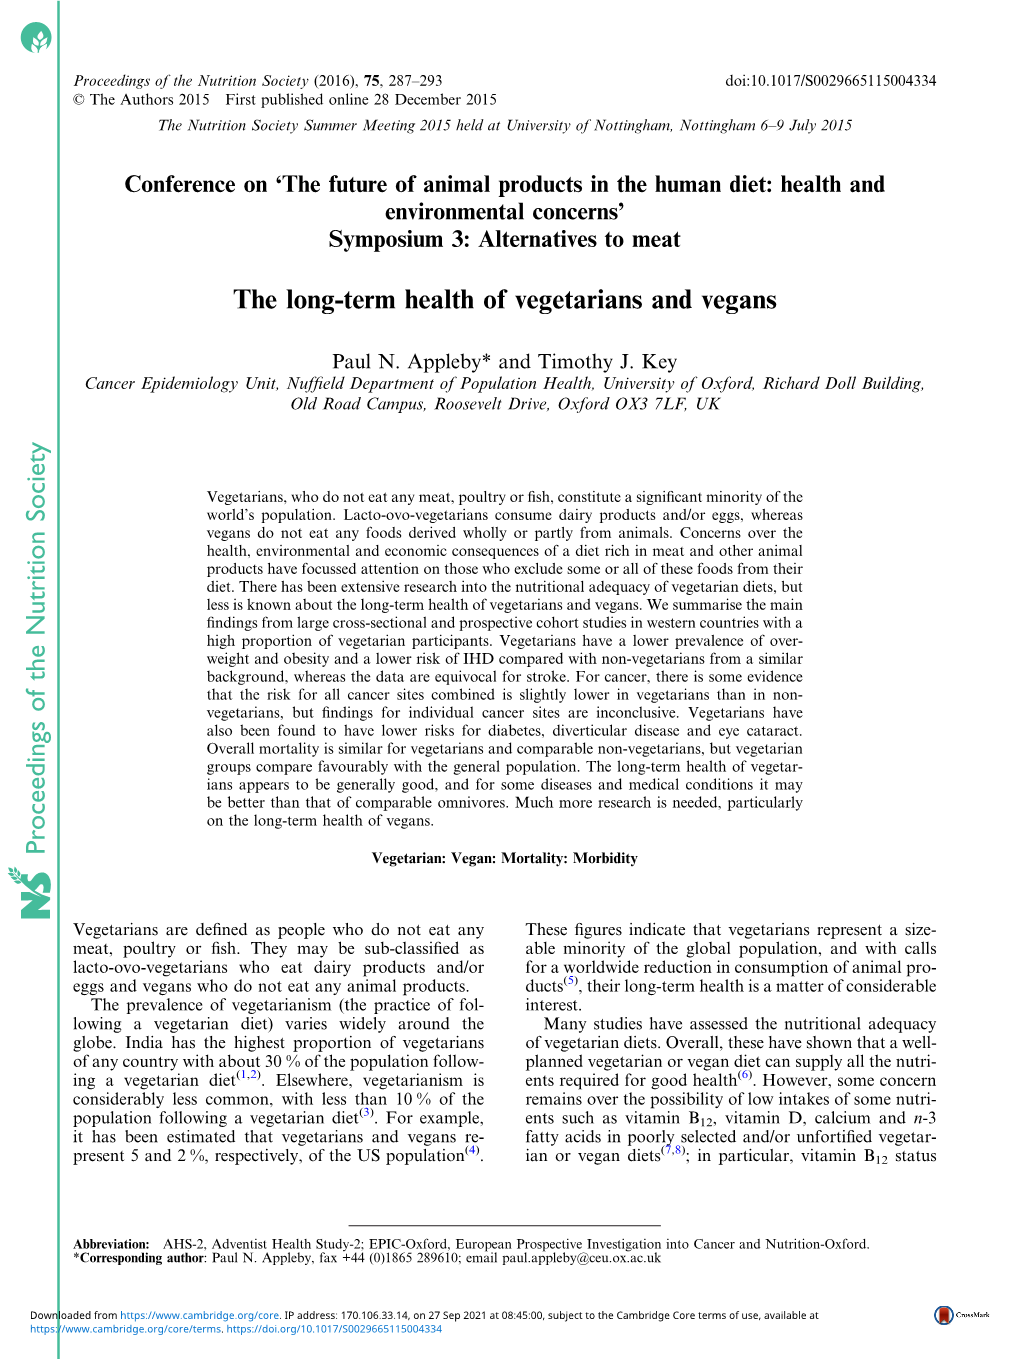 Proceedings of the Nutrition Society the Long-Term Health of Vegetarians and Vegans